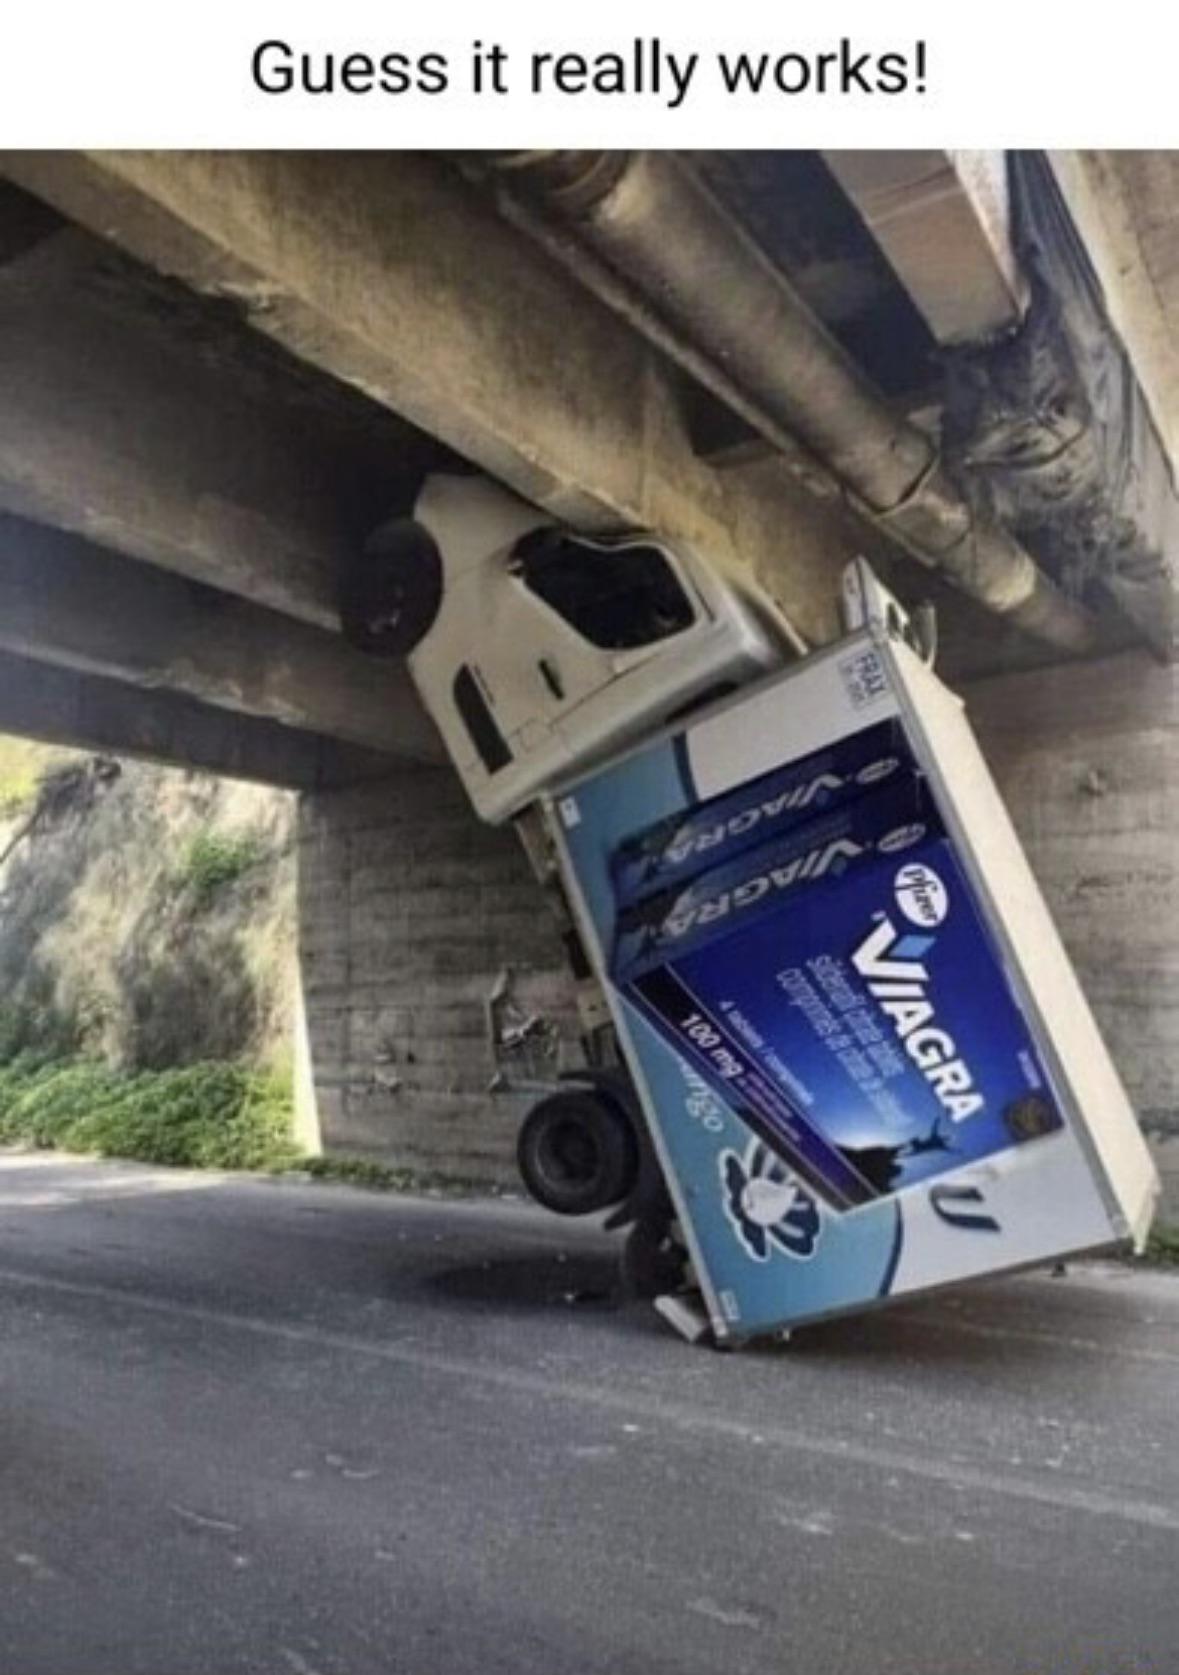 funny memes - Truck - Guess it really works! Frax Phizer Viagra Viagra U Viagra sidenal crate comprines de che 100 mg